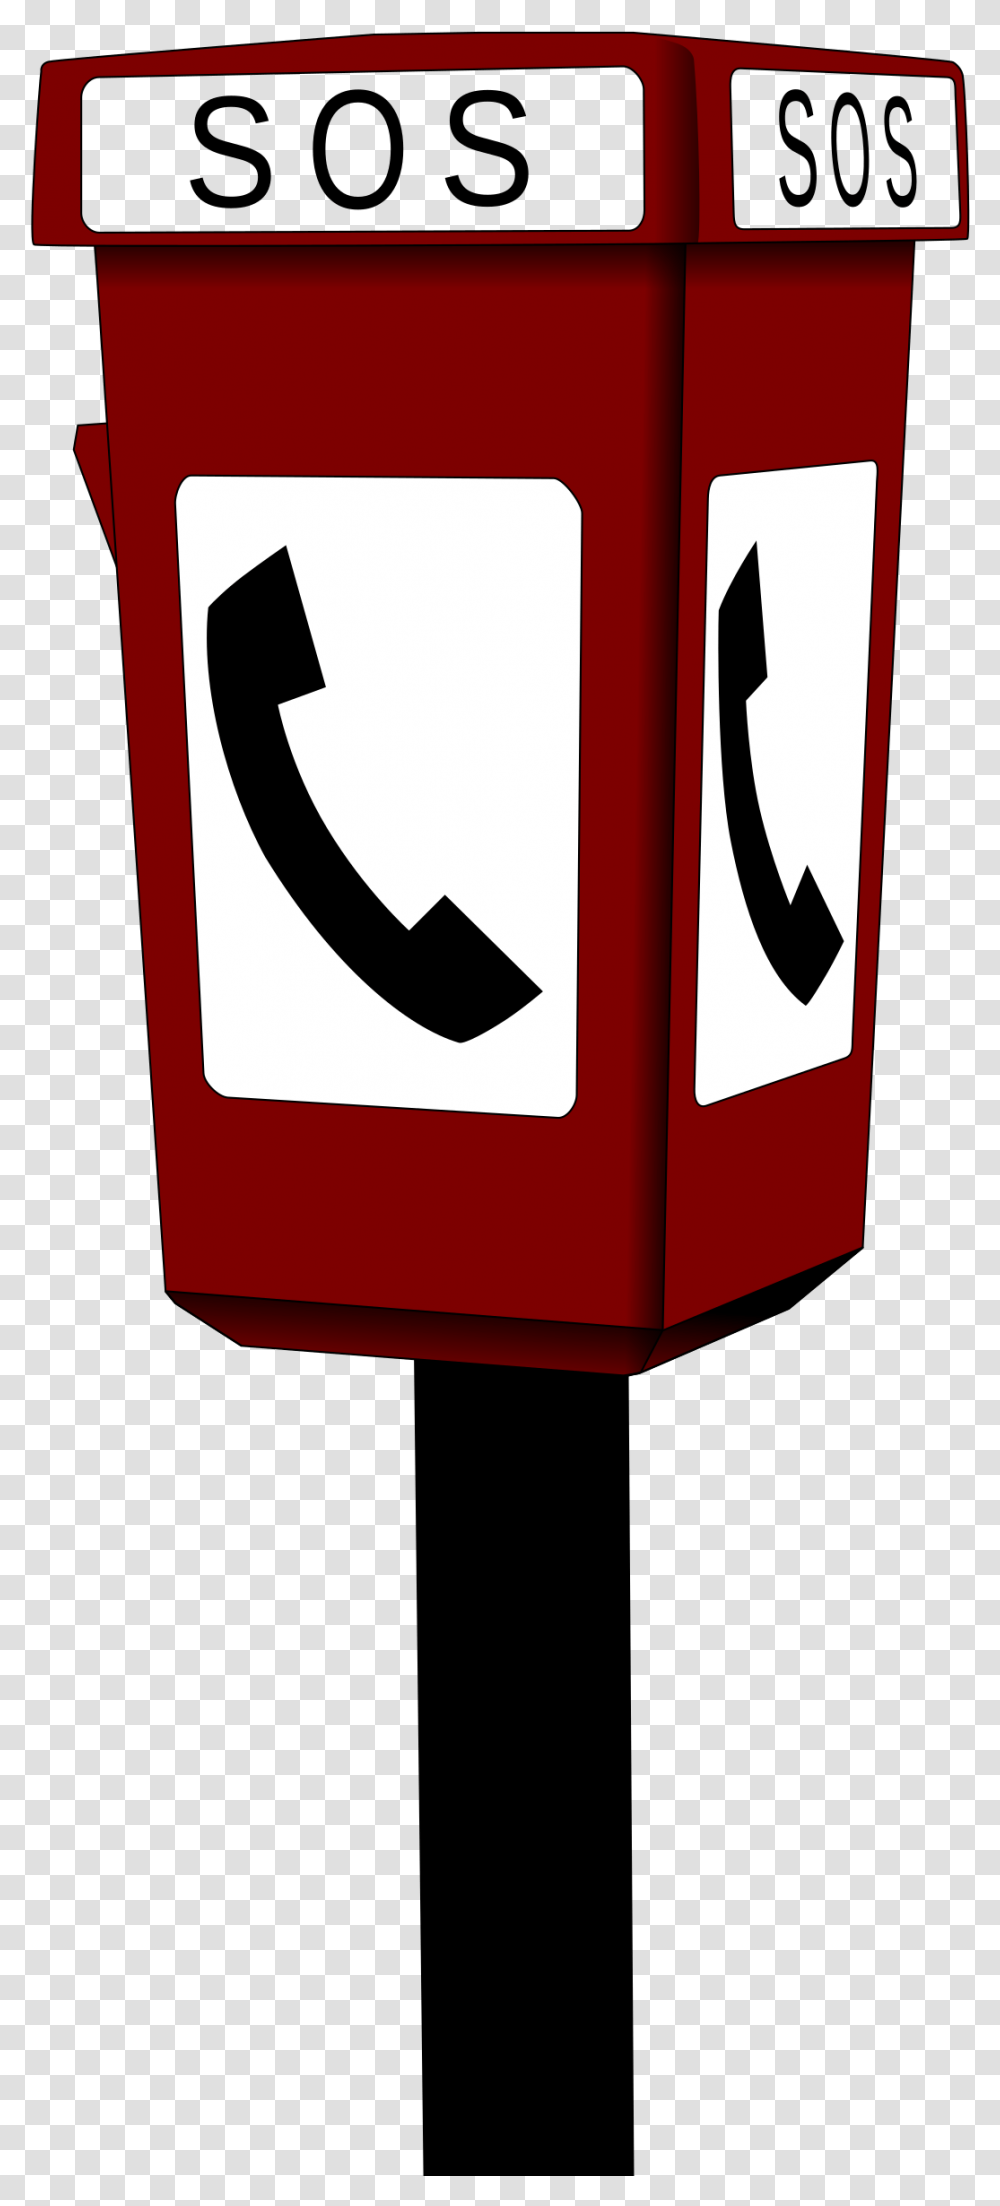 Emergency Telephone Clip Arts Phone Booth Clipart, Machine, Gas Pump, Mailbox Transparent Png